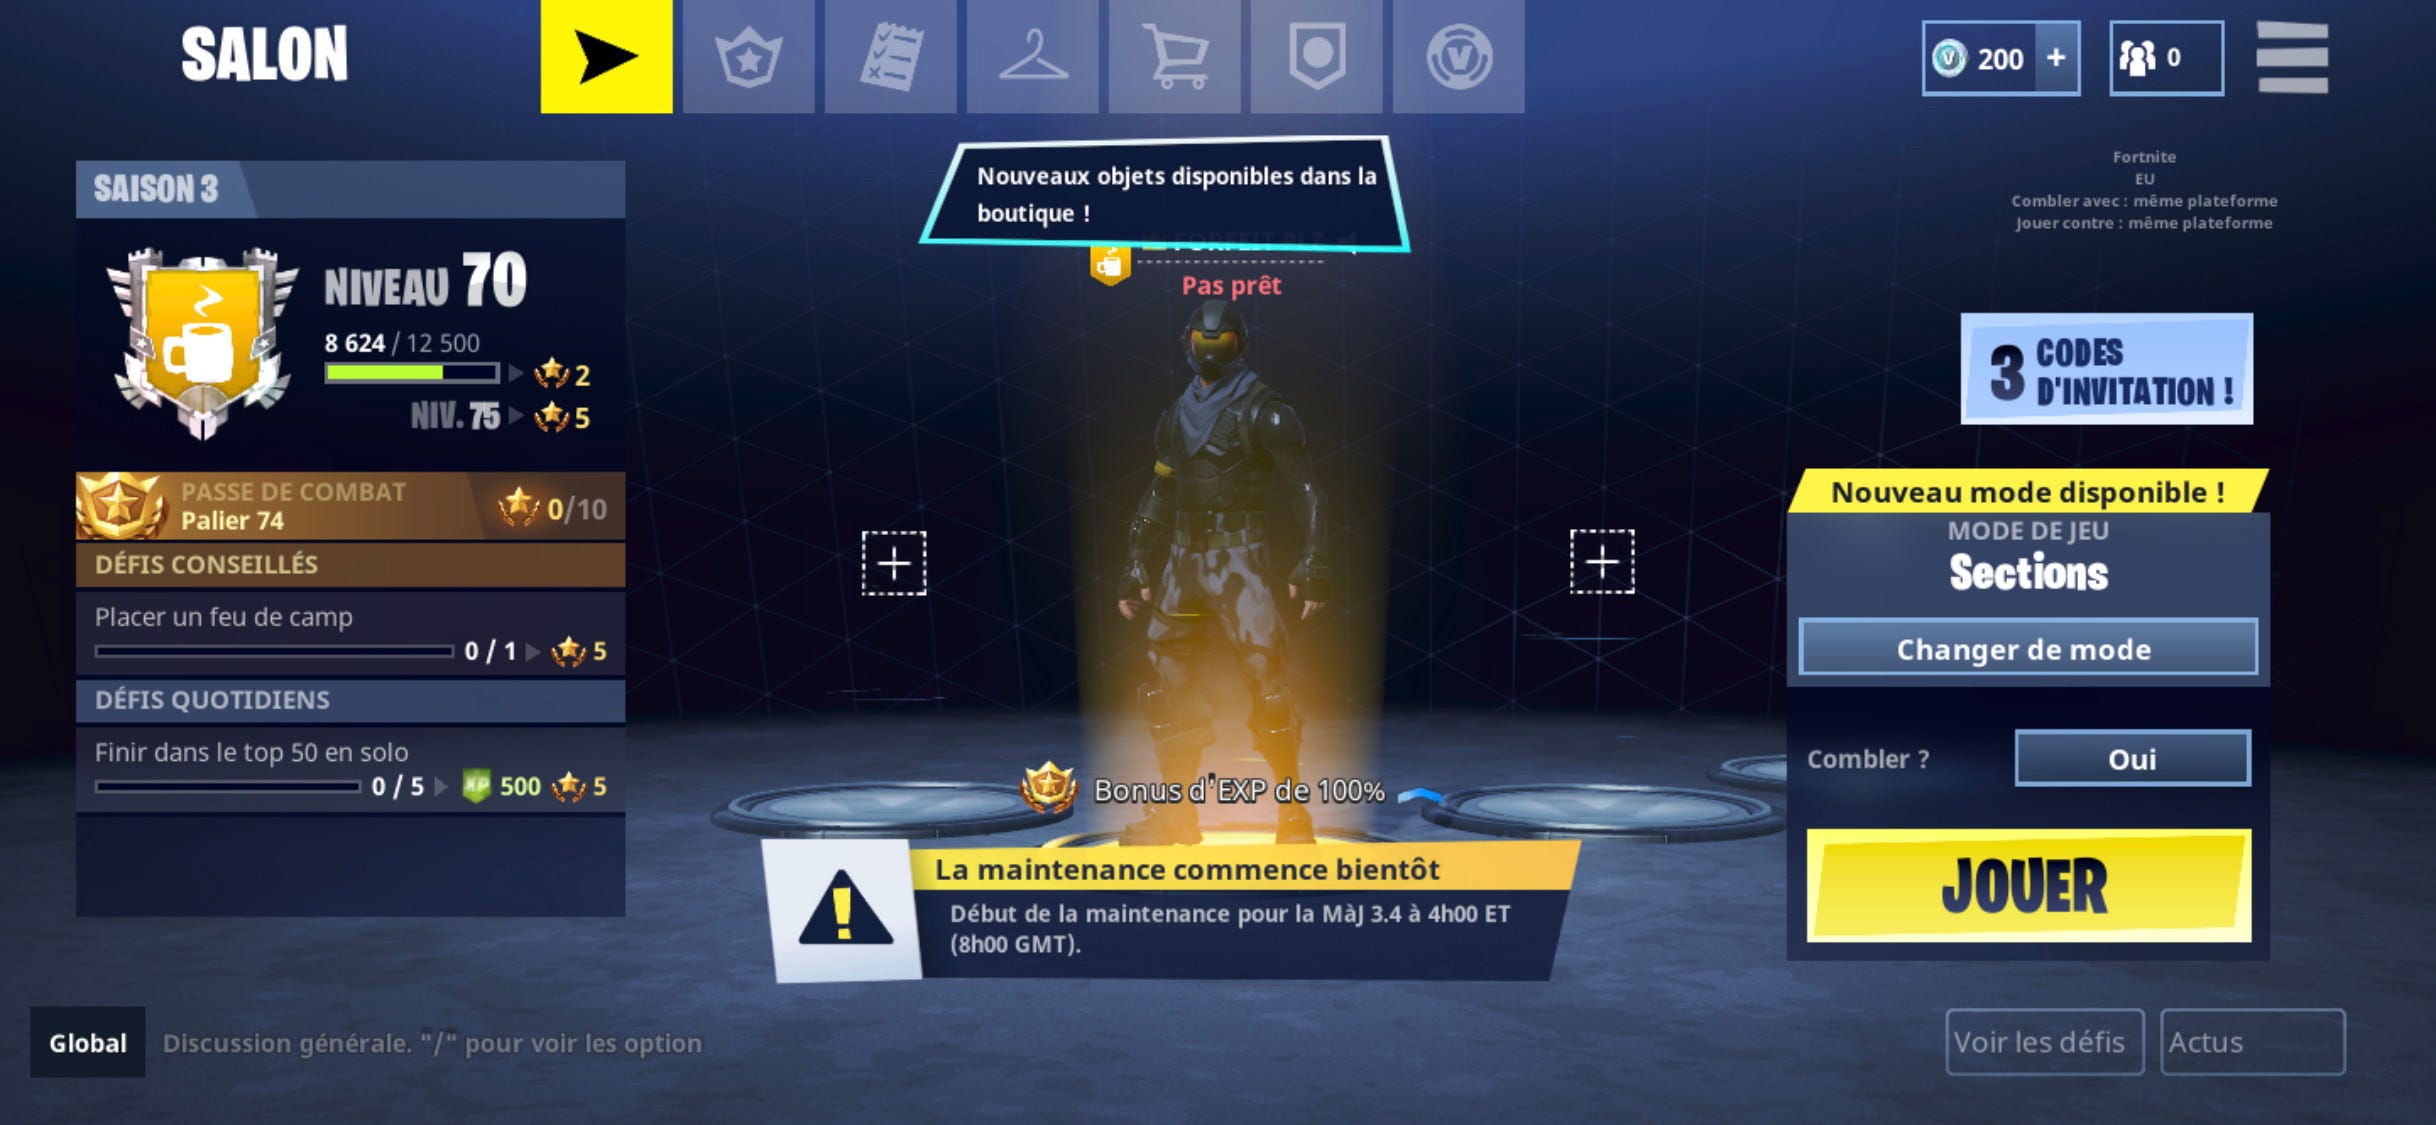 Cheat Codes For Fortnite On Nintendo Switch Free Download Online For Mobile Ios And Android Xbox Ps4 Windows By Debrajchritrt Medium